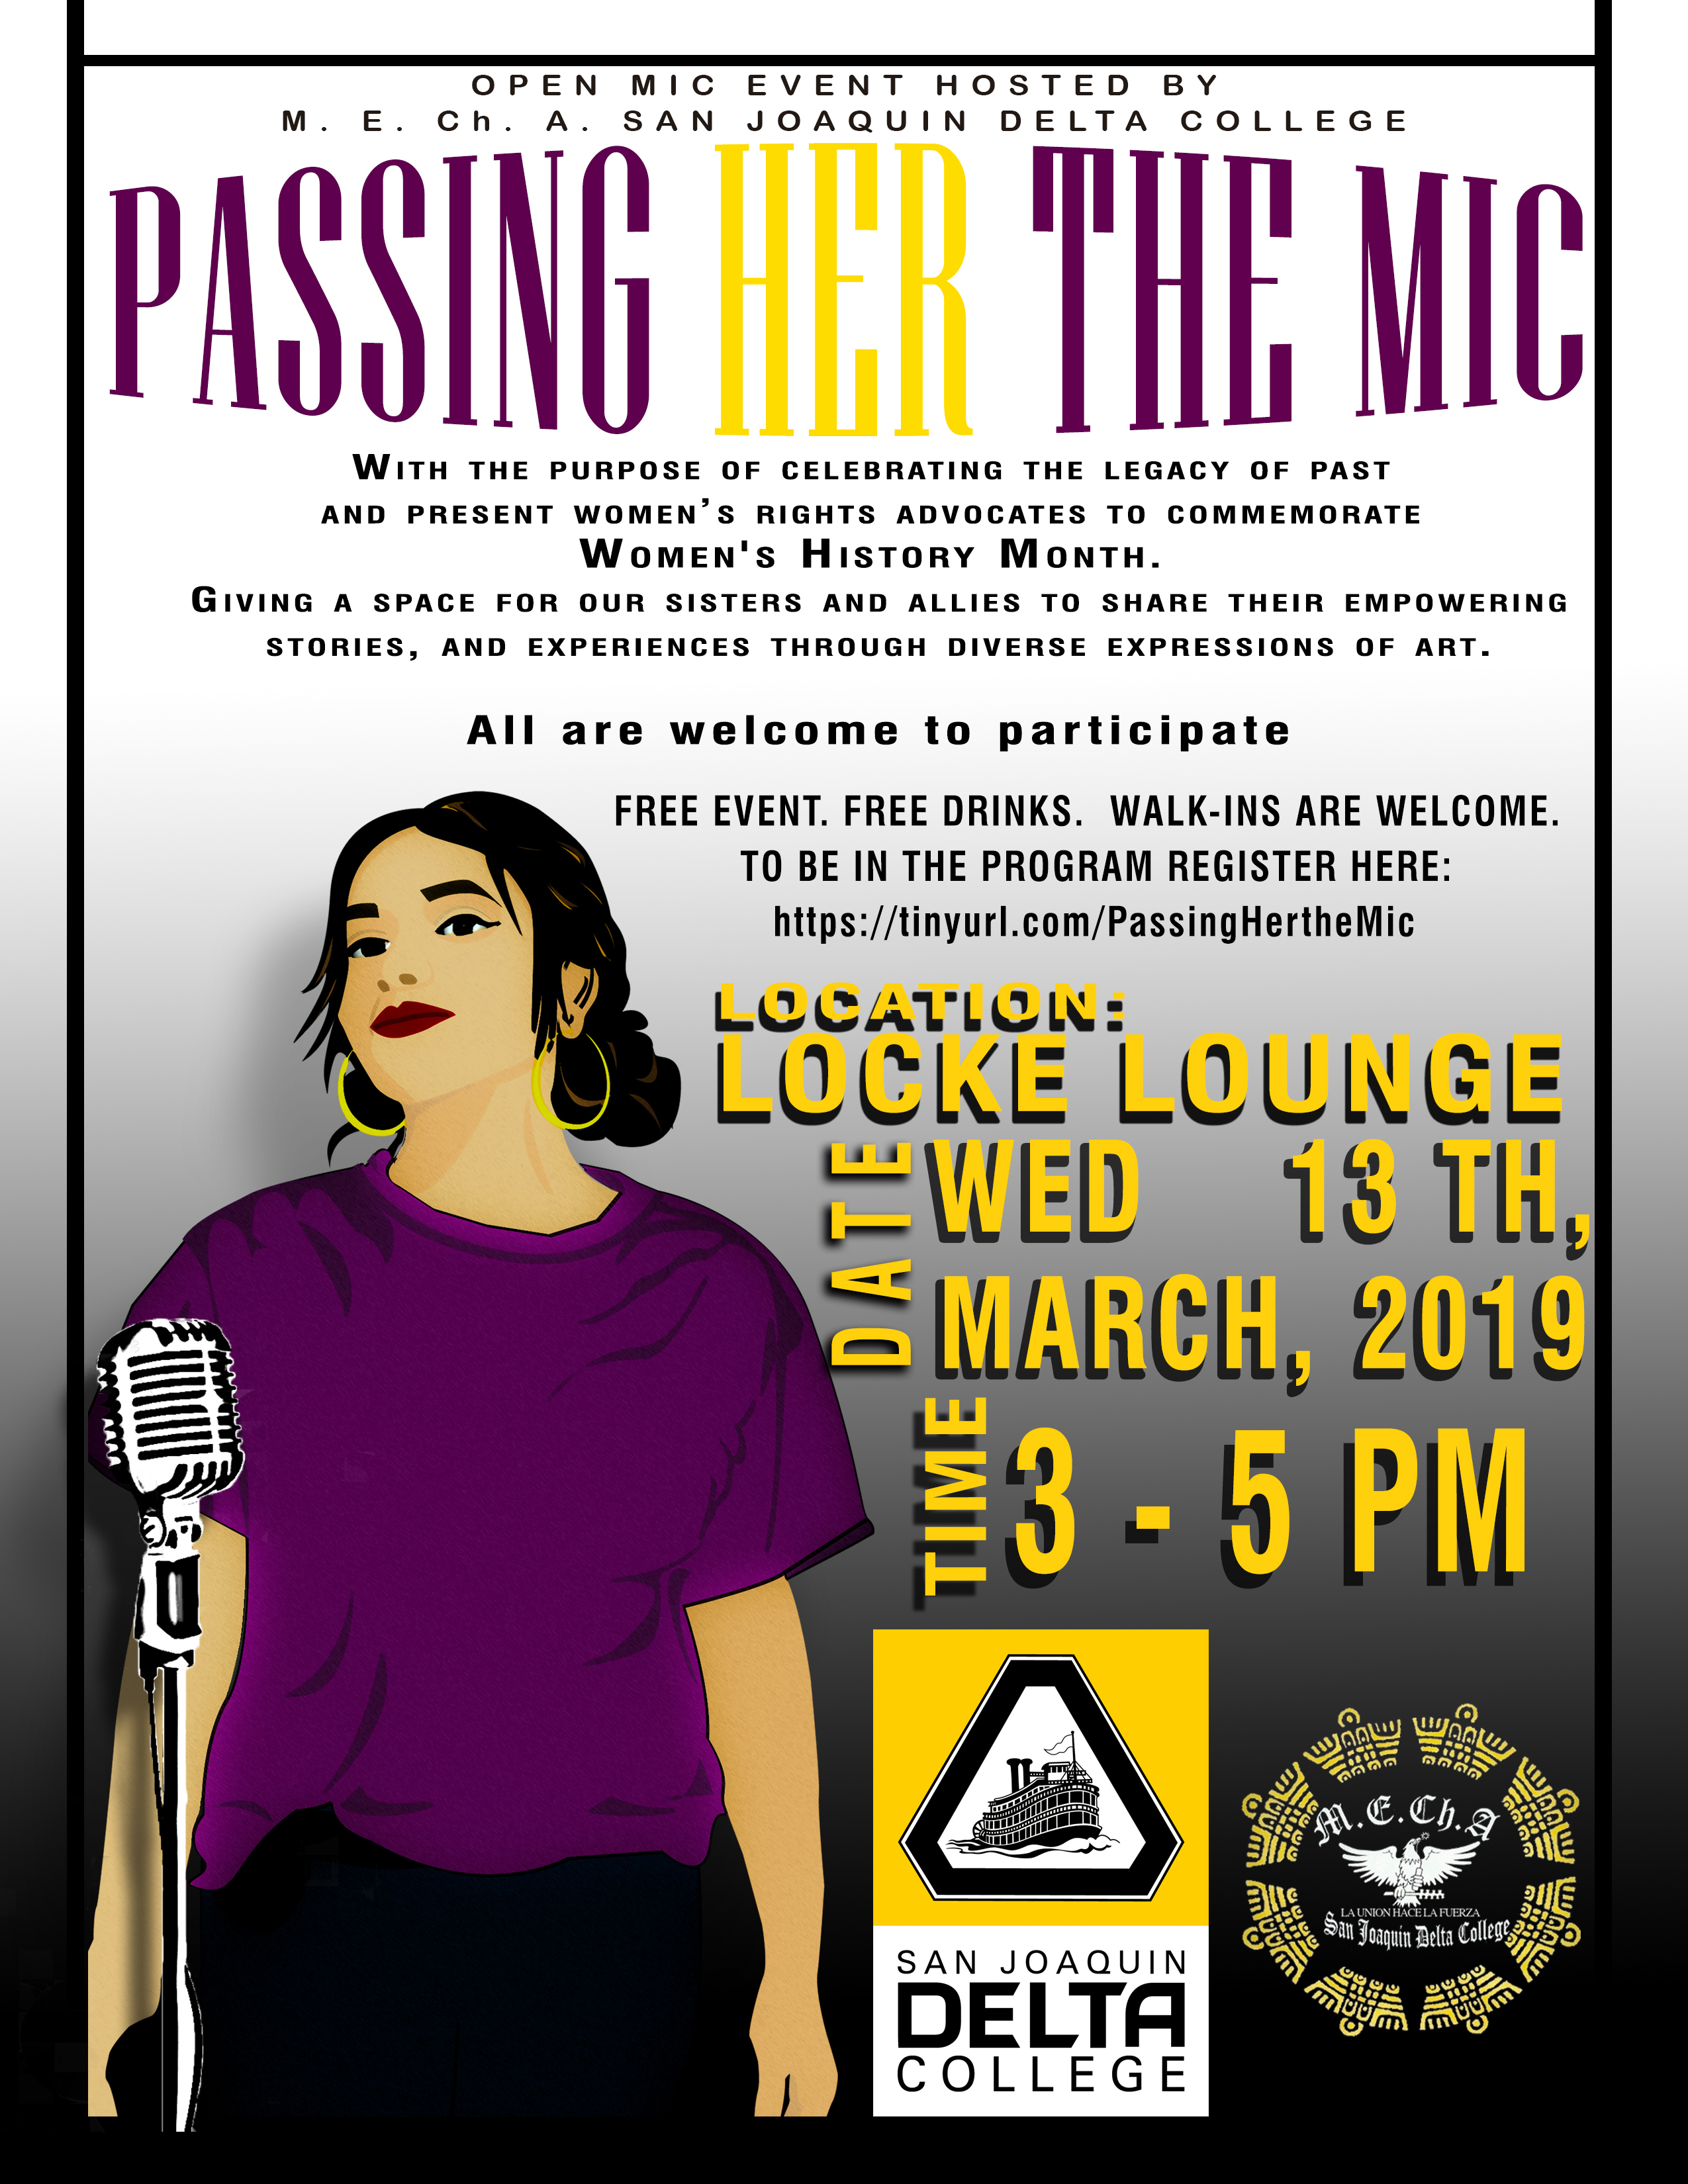 "Passing Her The Mic" is one of a number of events planned at San Joaquin Delta College for Women's History Month.